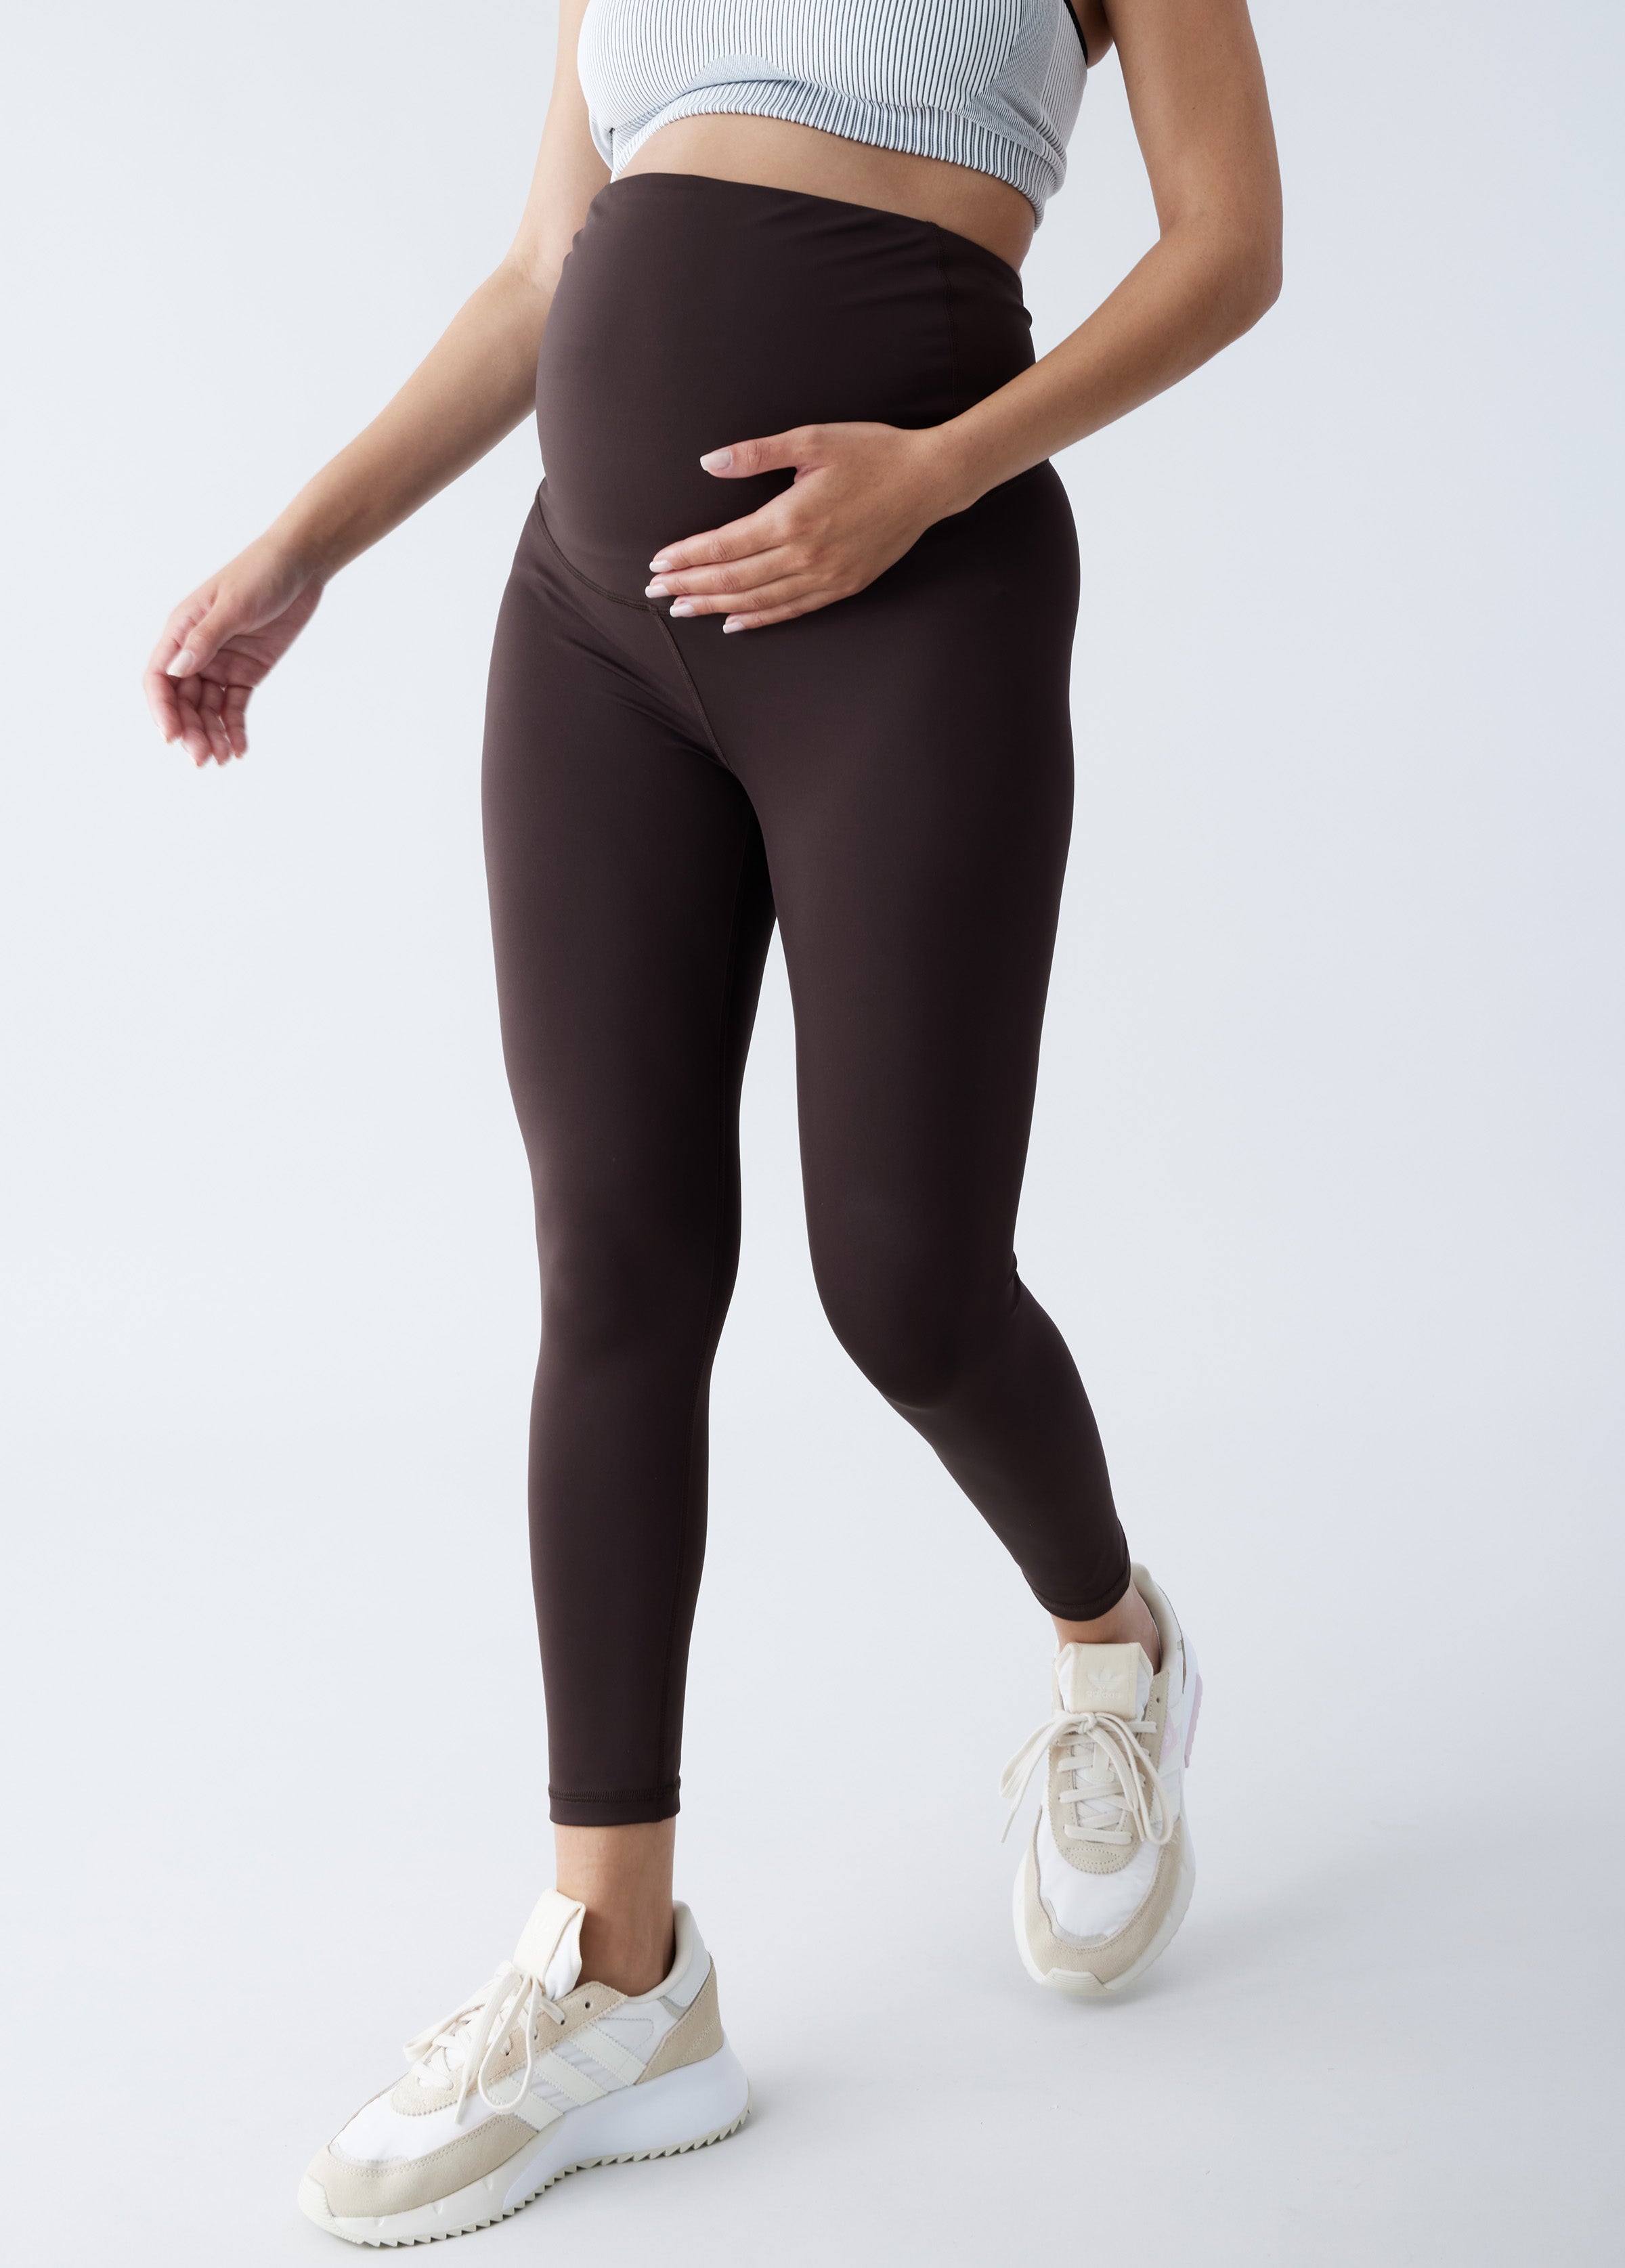 Maternity Workout Leggings 7/8 Length Women Comfortable Thigh Slimmer Slip  Elasticity Cropped Pleated Pants 